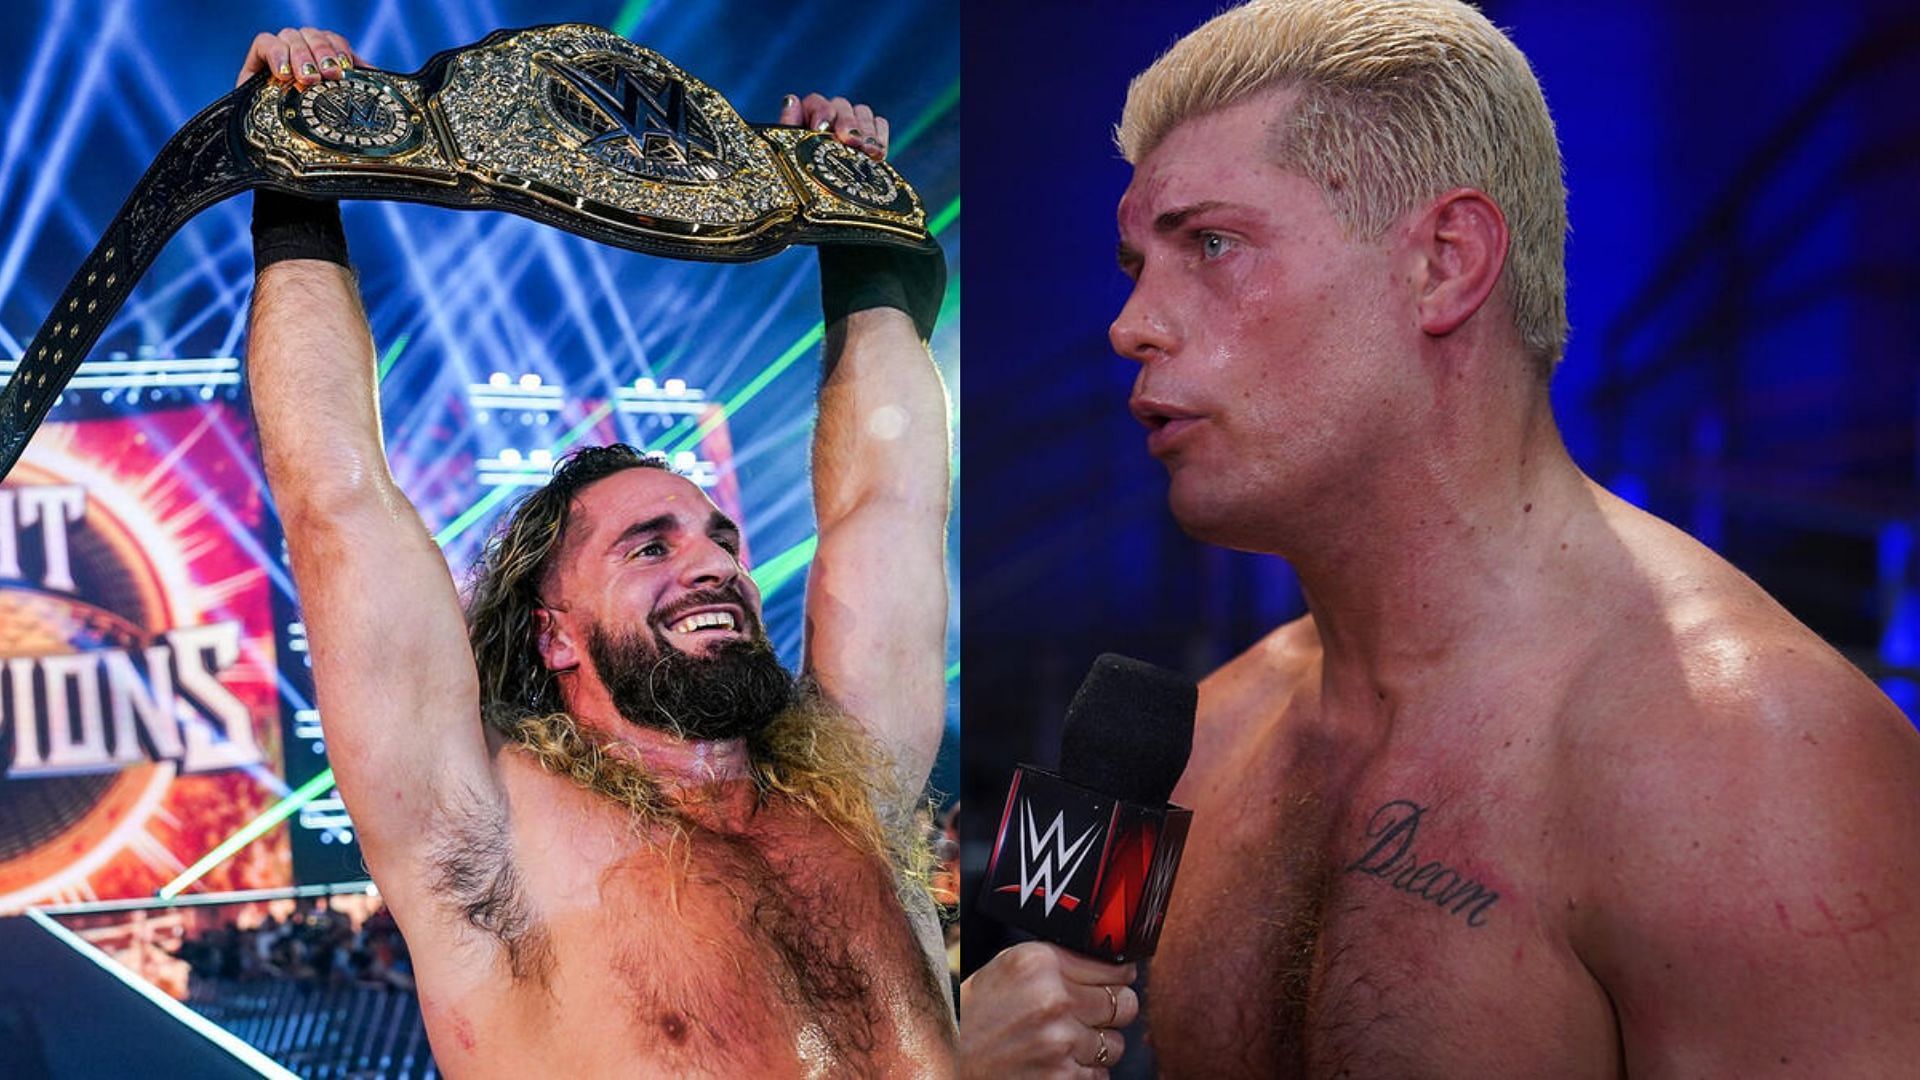 Seth Rollins and Cody Rhodes are two of the top babyfaces in WWE